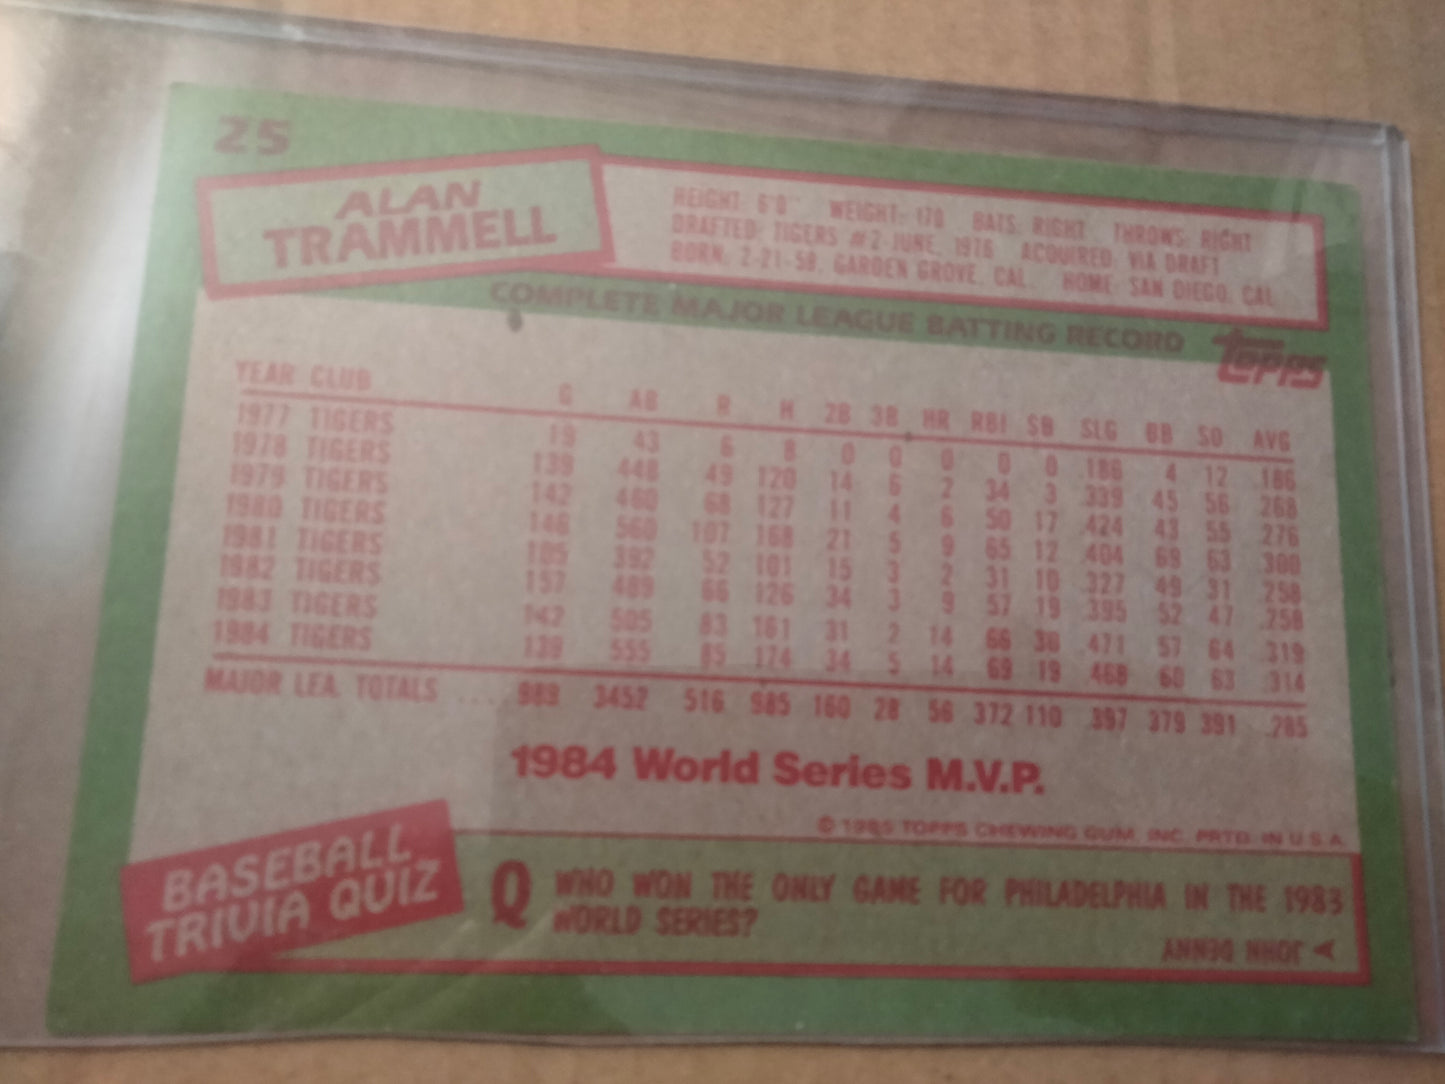 1985 Topps Alan Trammell Autographed 5" x 7" Enlarged Signed Players Card #25 Detroit Tigers